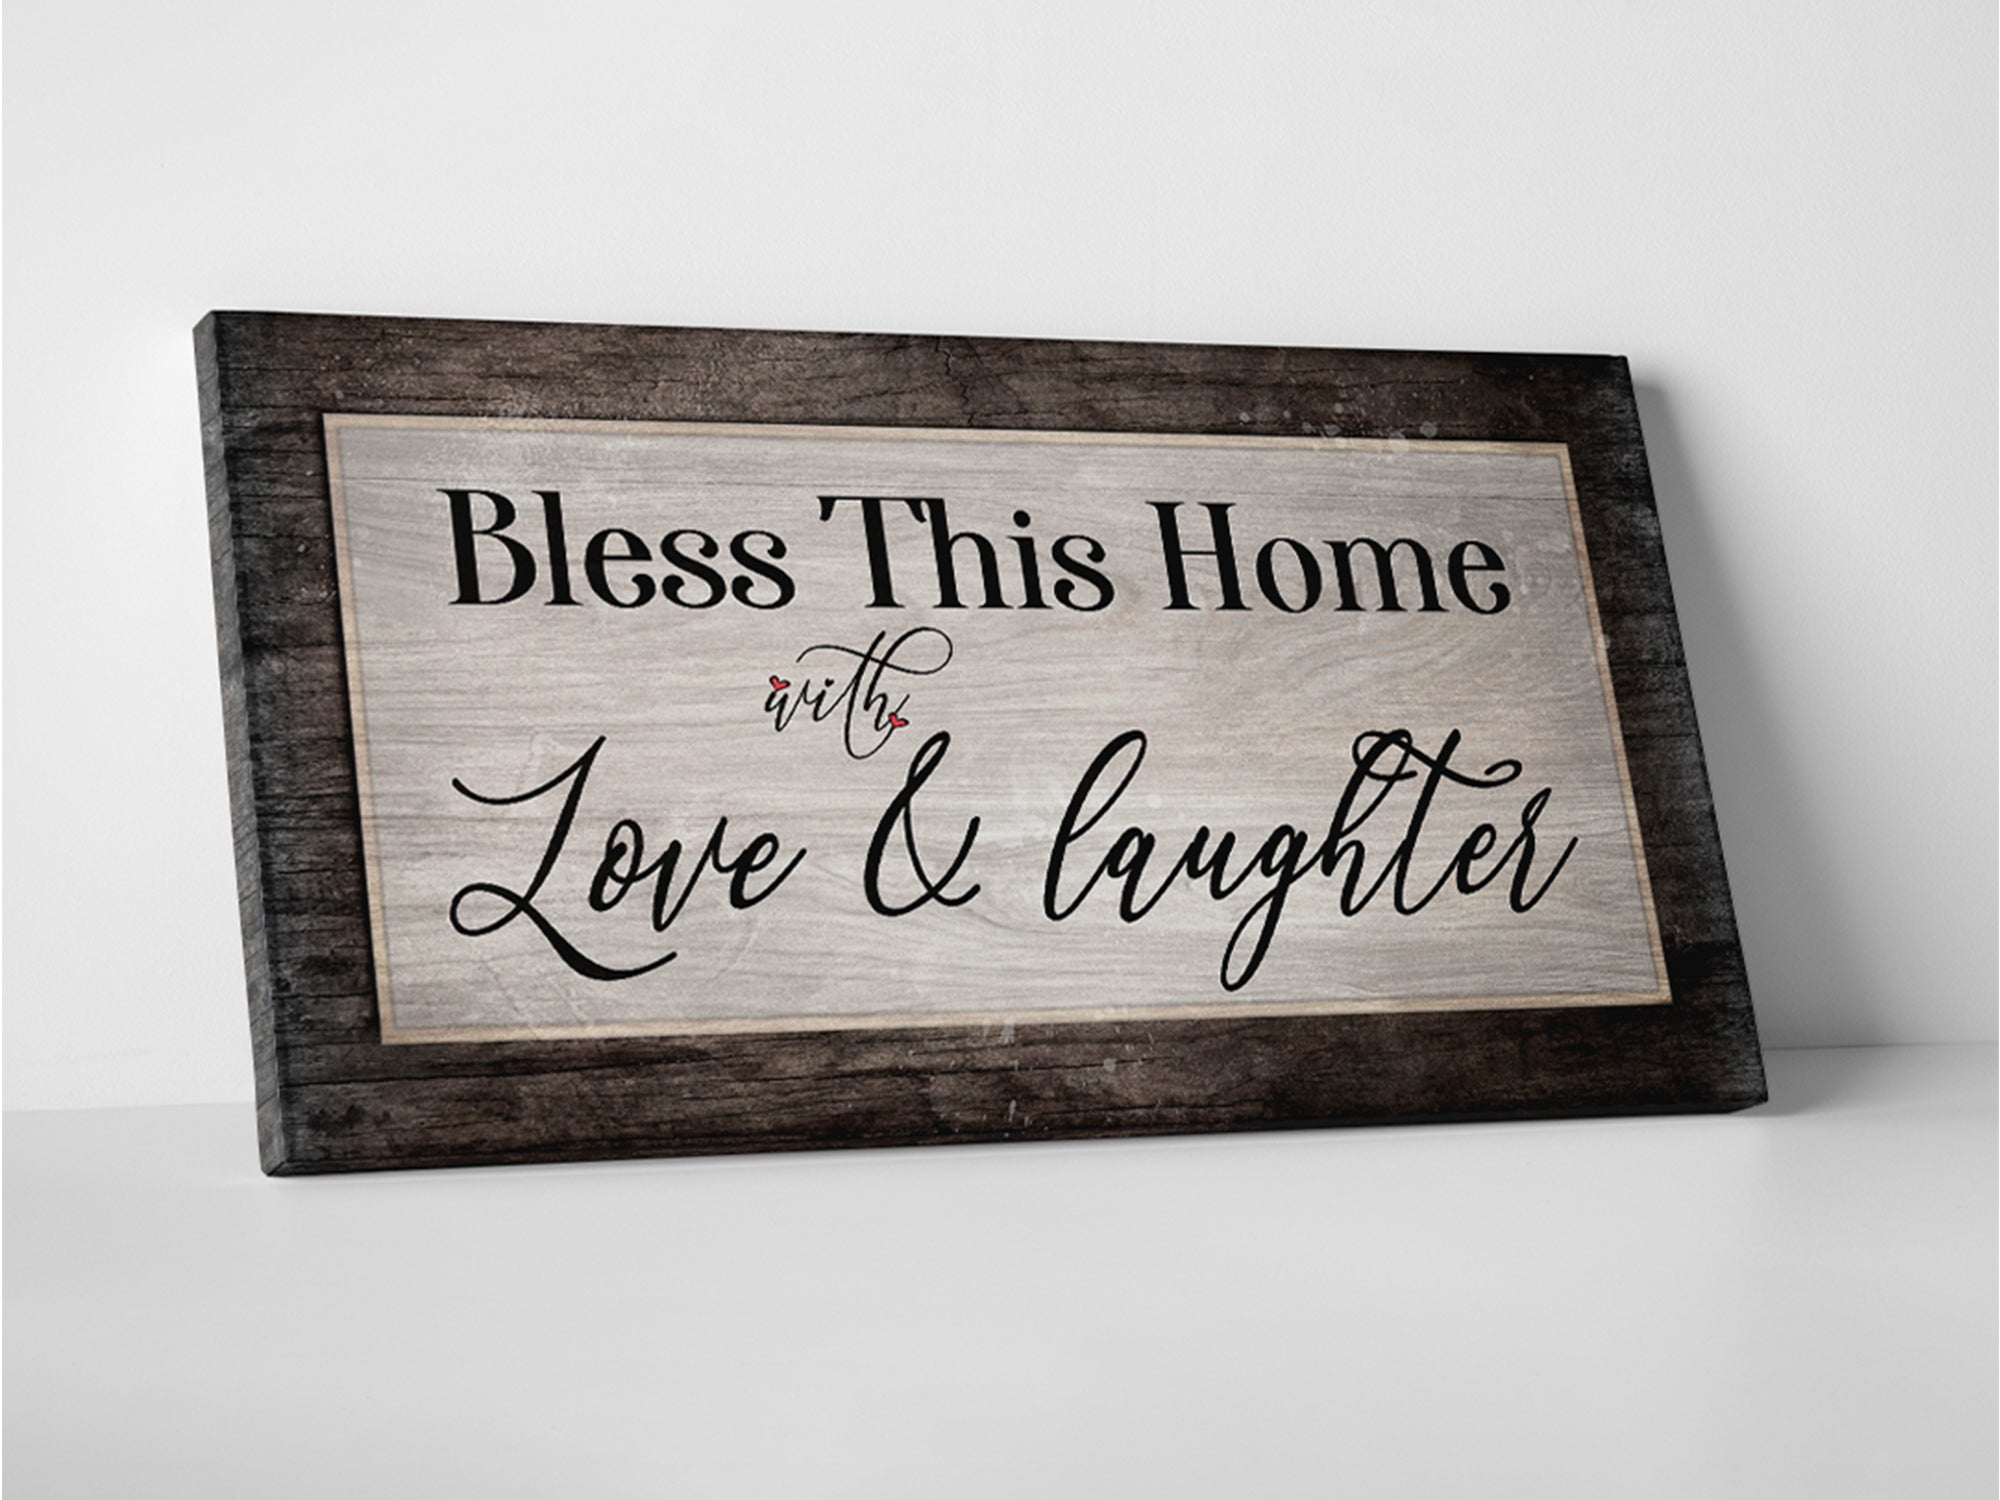 Blessed With Love & Laughter - Christian - Canvas Wall Art